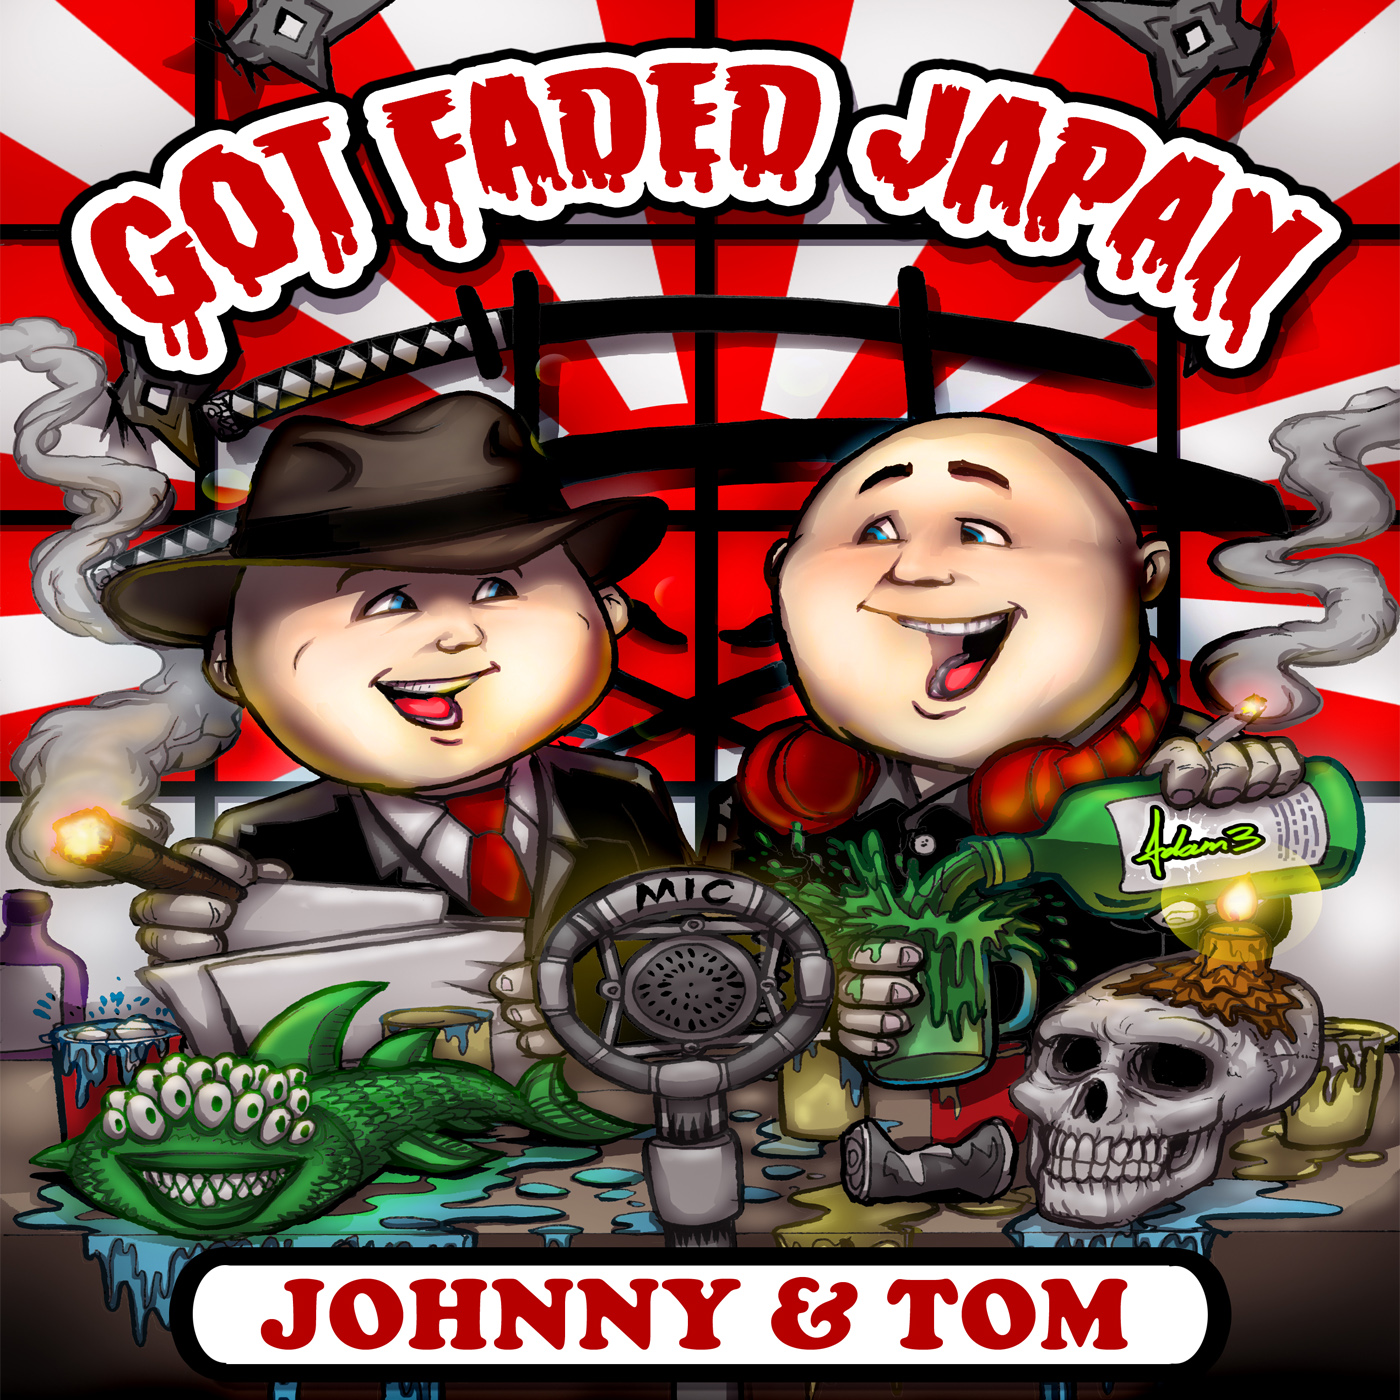 Got Faded Japan ep 328. BEER, WHISKY & The American Gigolo